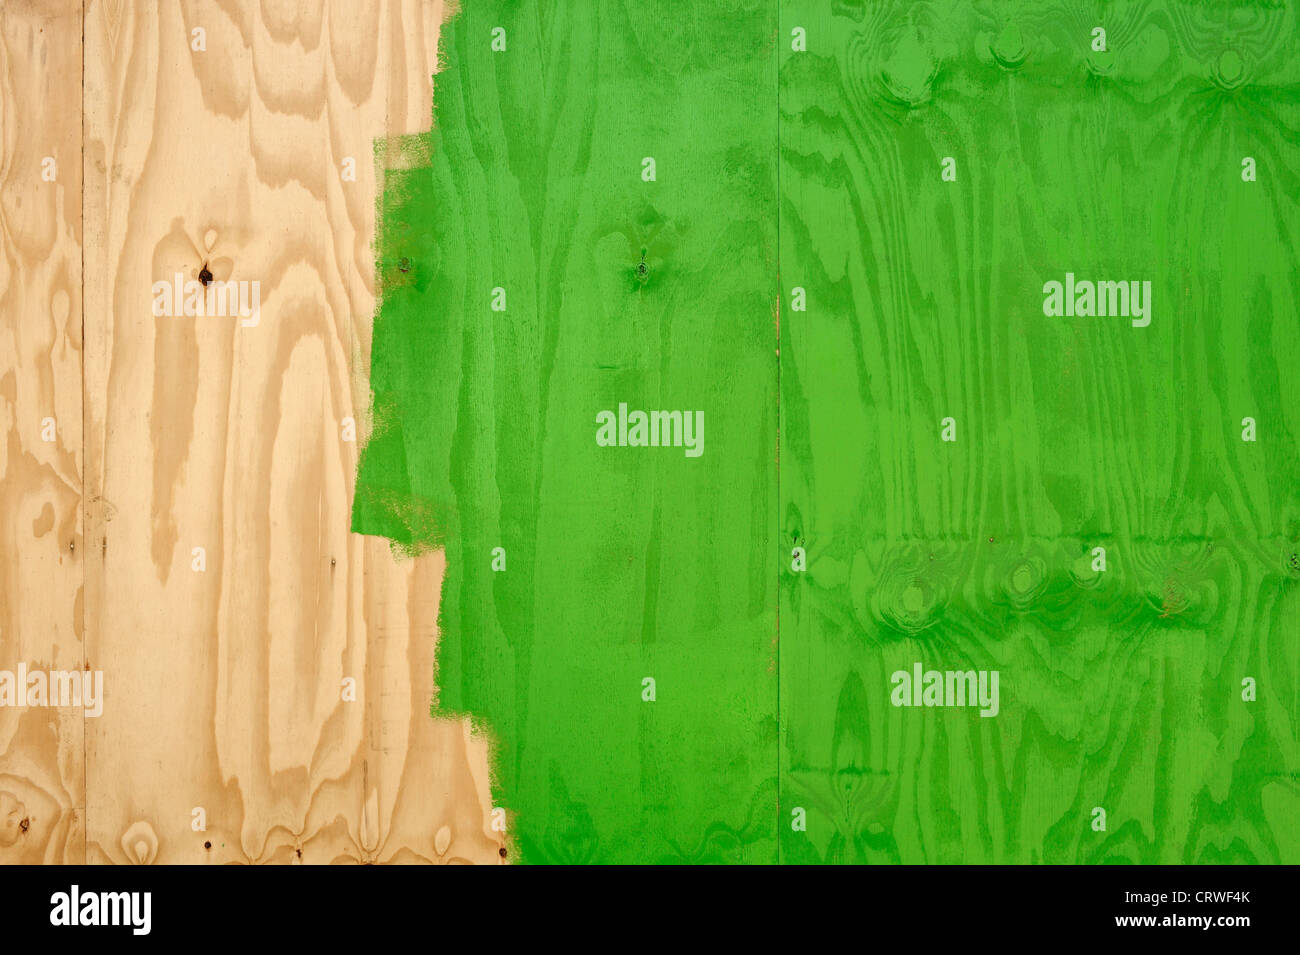 Wooden wall being painted green Stock Photo